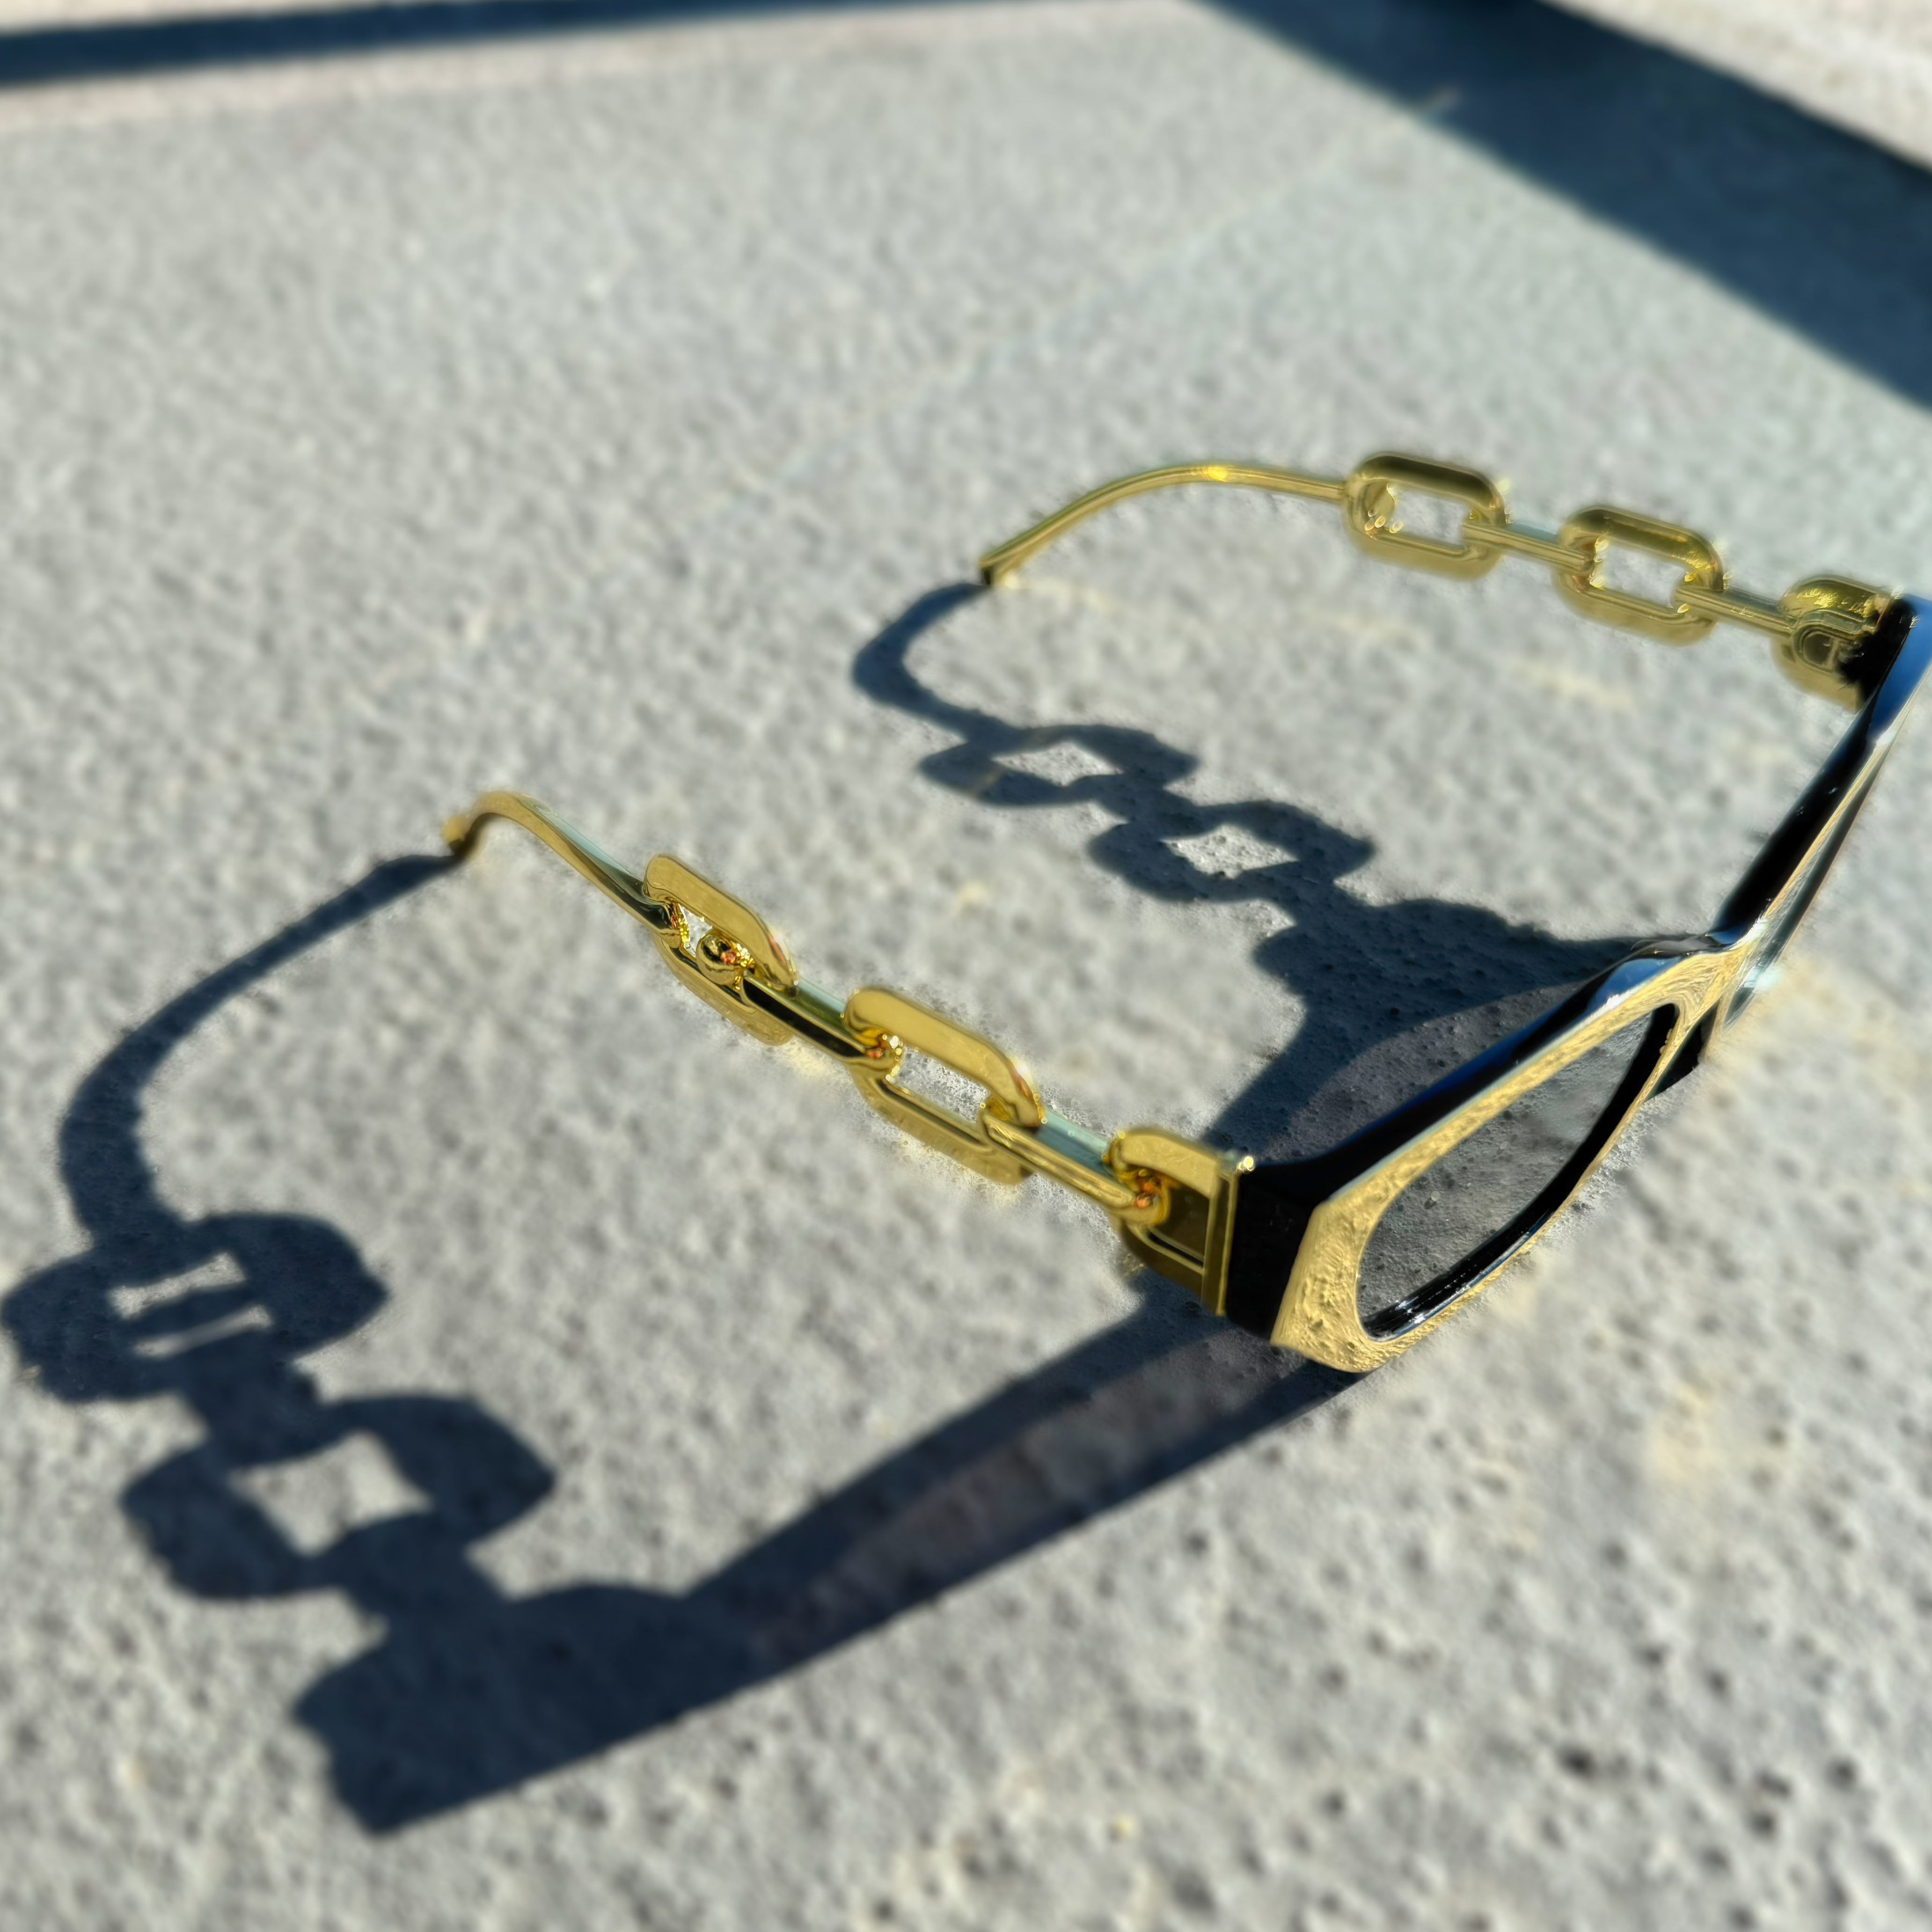 Gold Member Exclusive Sunglasses - We Stay Pretty